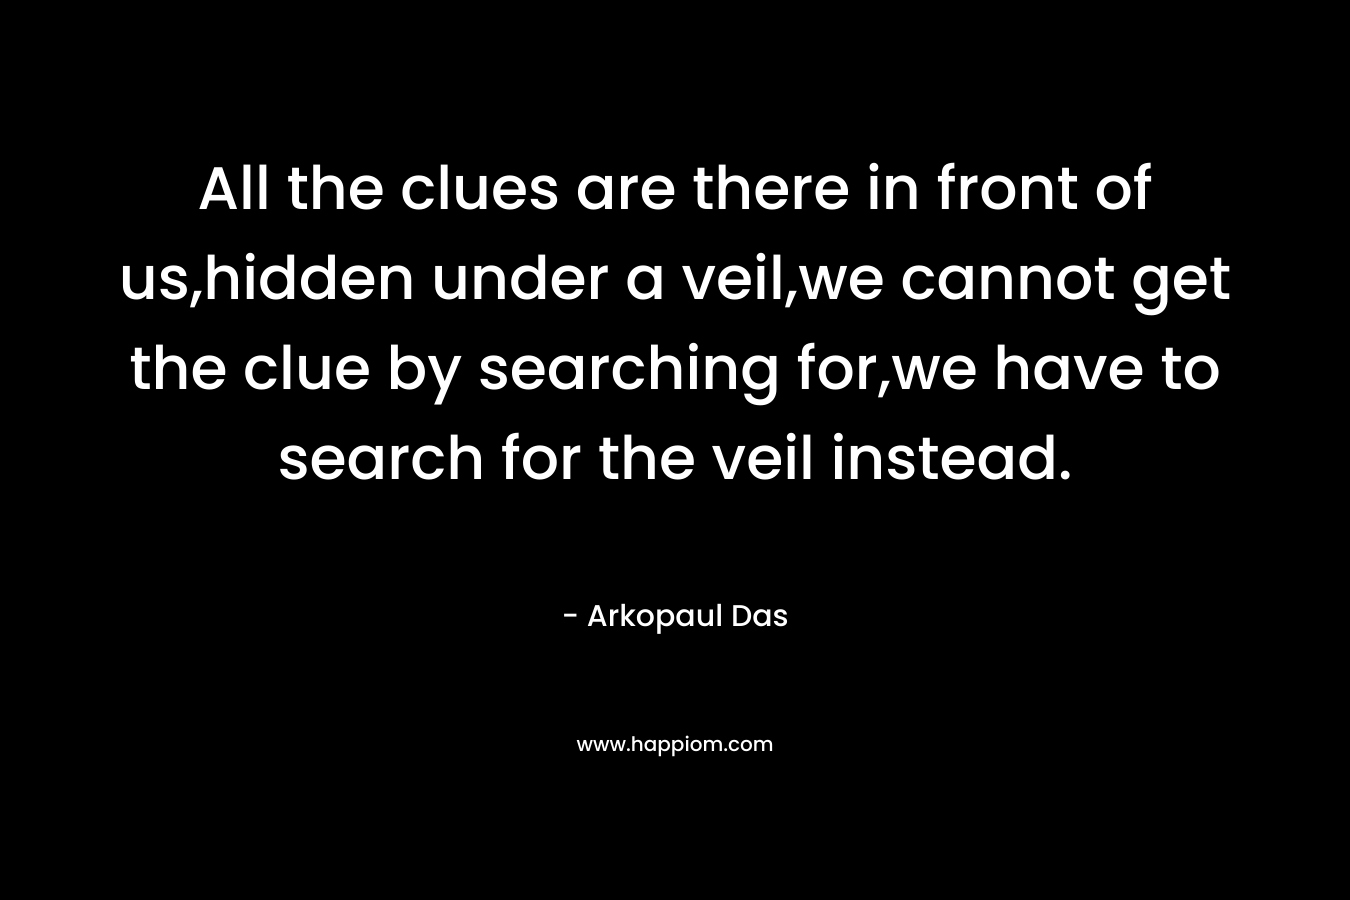 All the clues are there in front of us,hidden under a veil,we cannot get the clue by searching for,we have to search for the veil instead.